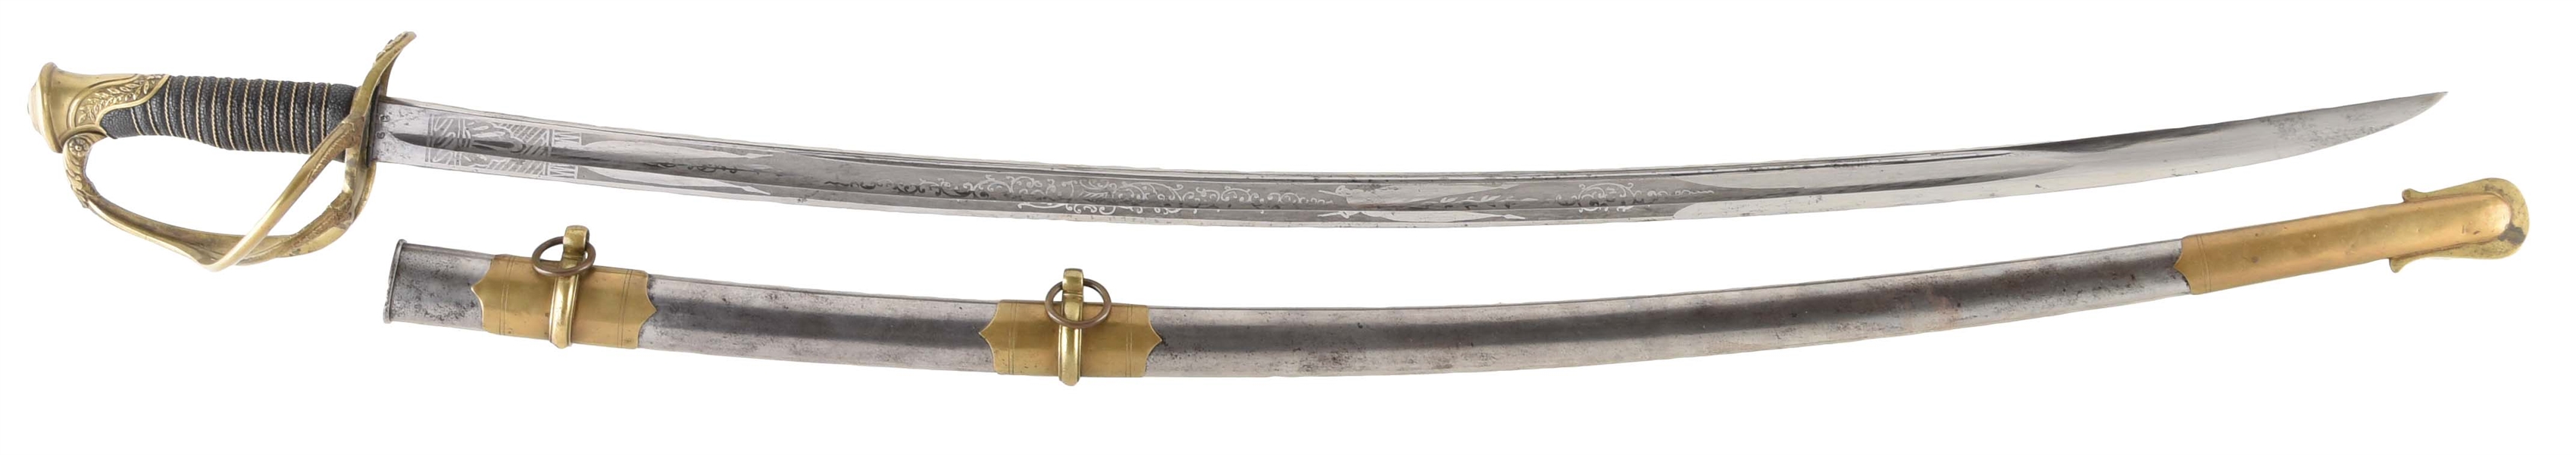 IMPORTED MODEL 1860 CAVALRY OFFICERS STYLE SABER.